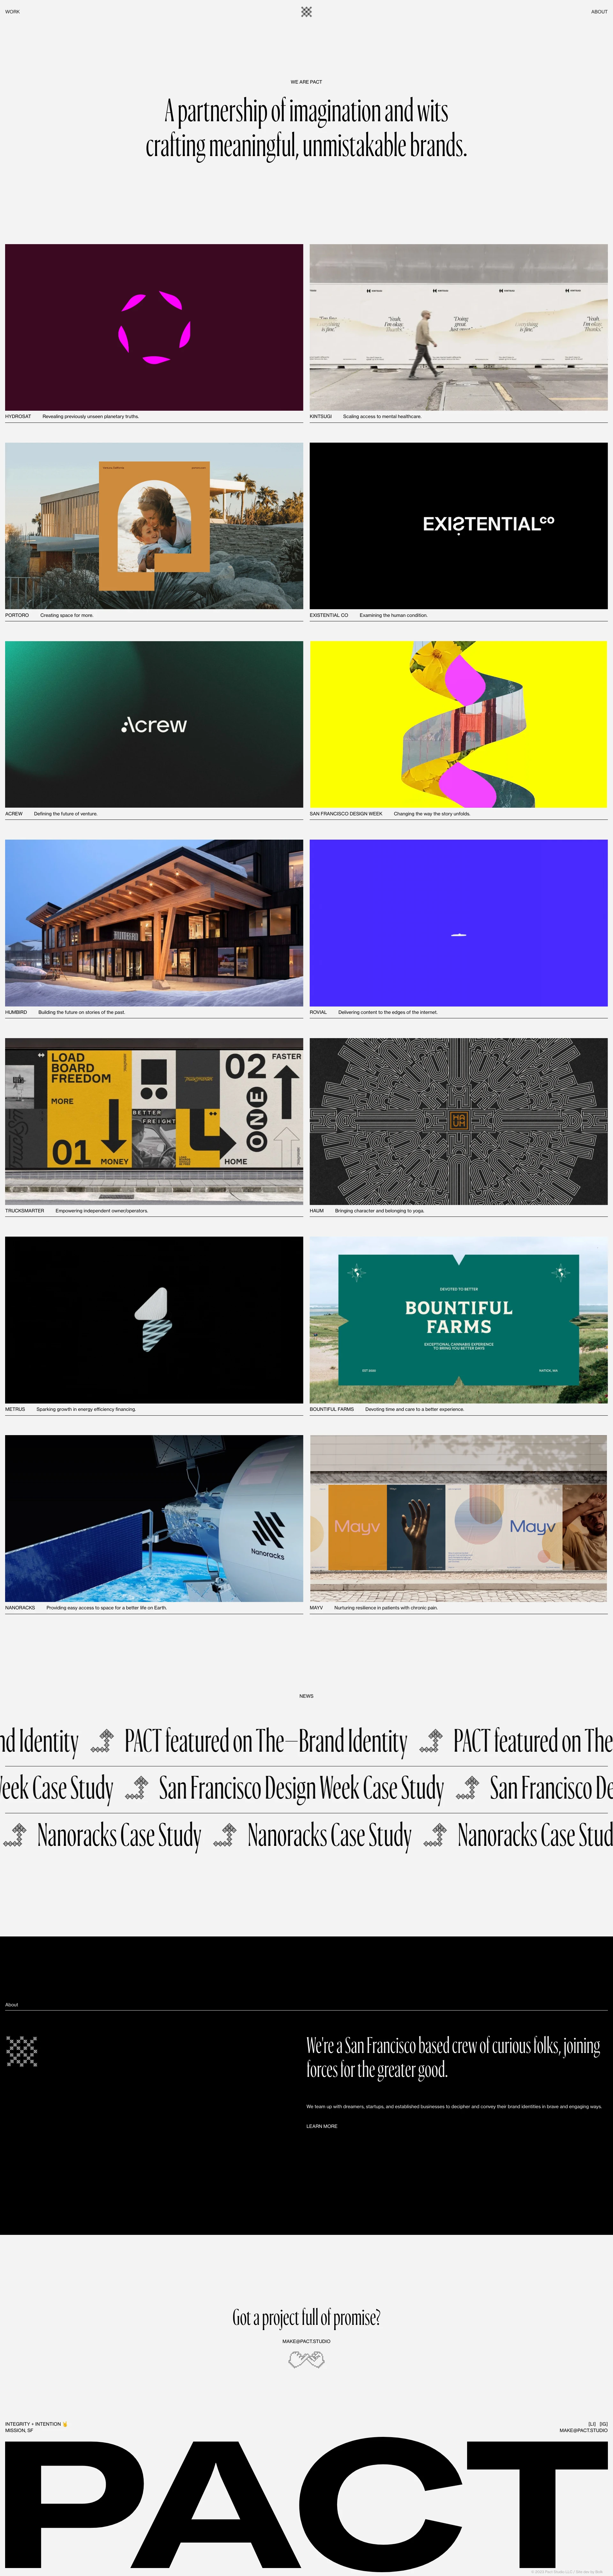 PACT Landing Page Example: A partnership of imagination and wits crafting meaningful, unmistakable brands.